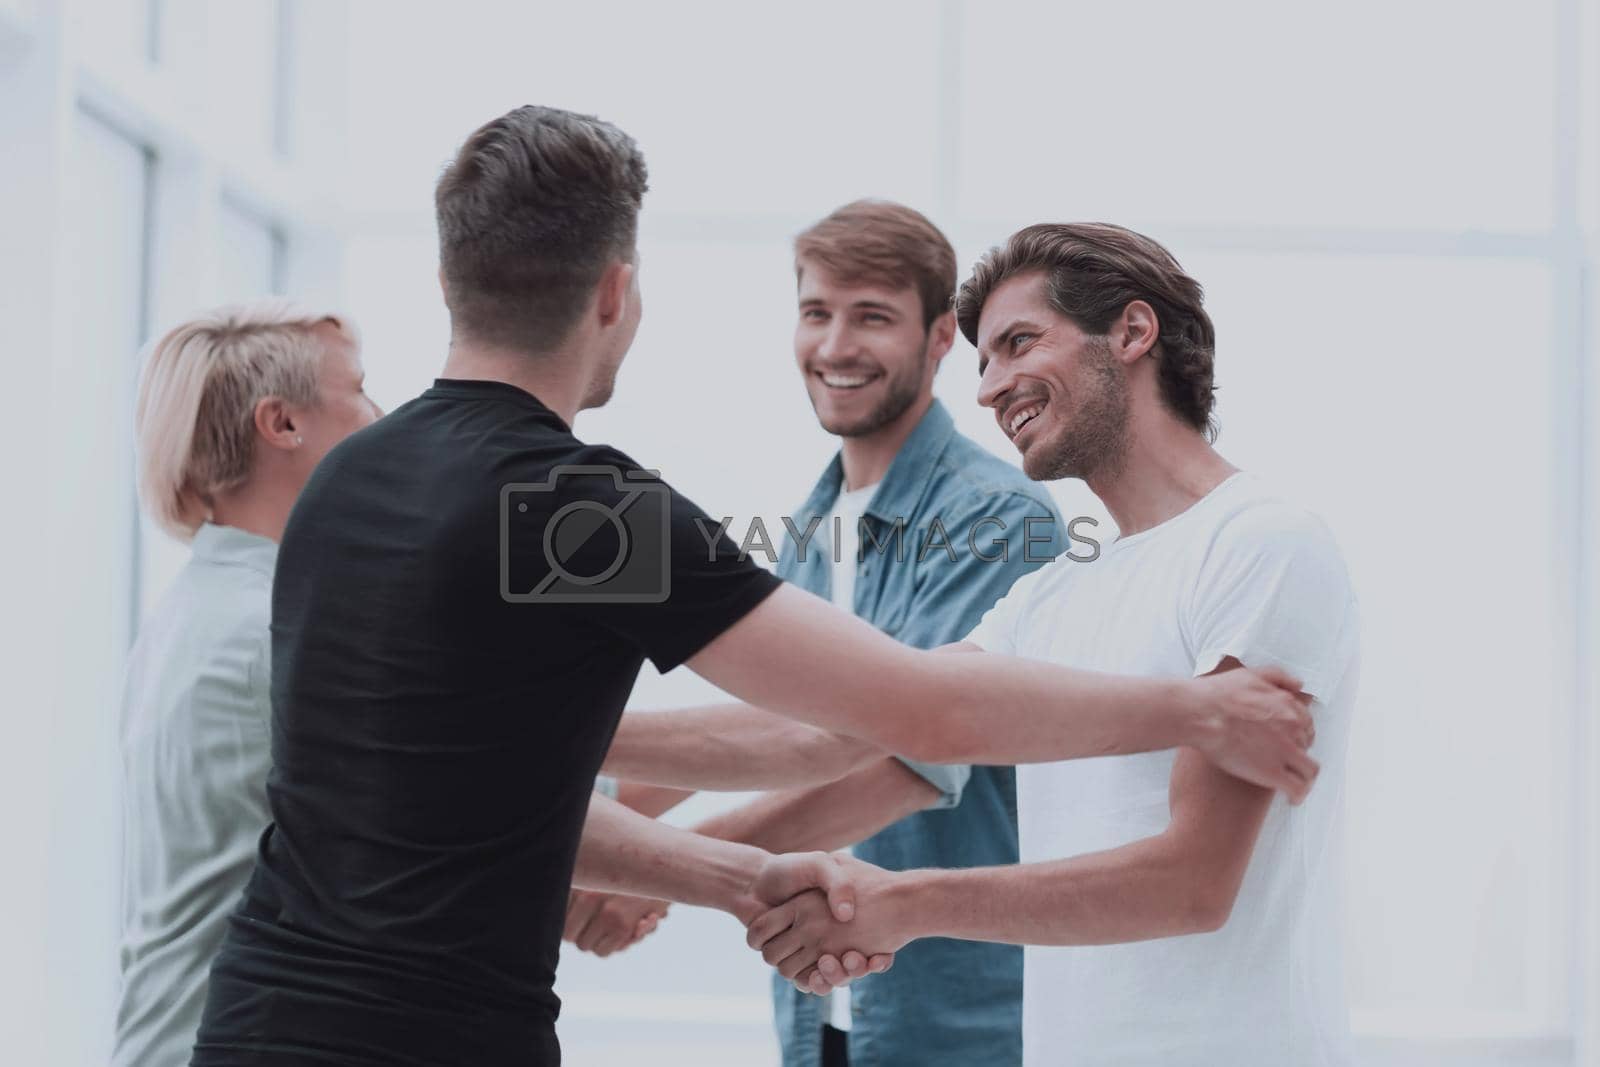 Royalty free image of colleagues shaking hands in the office lobby by asdf